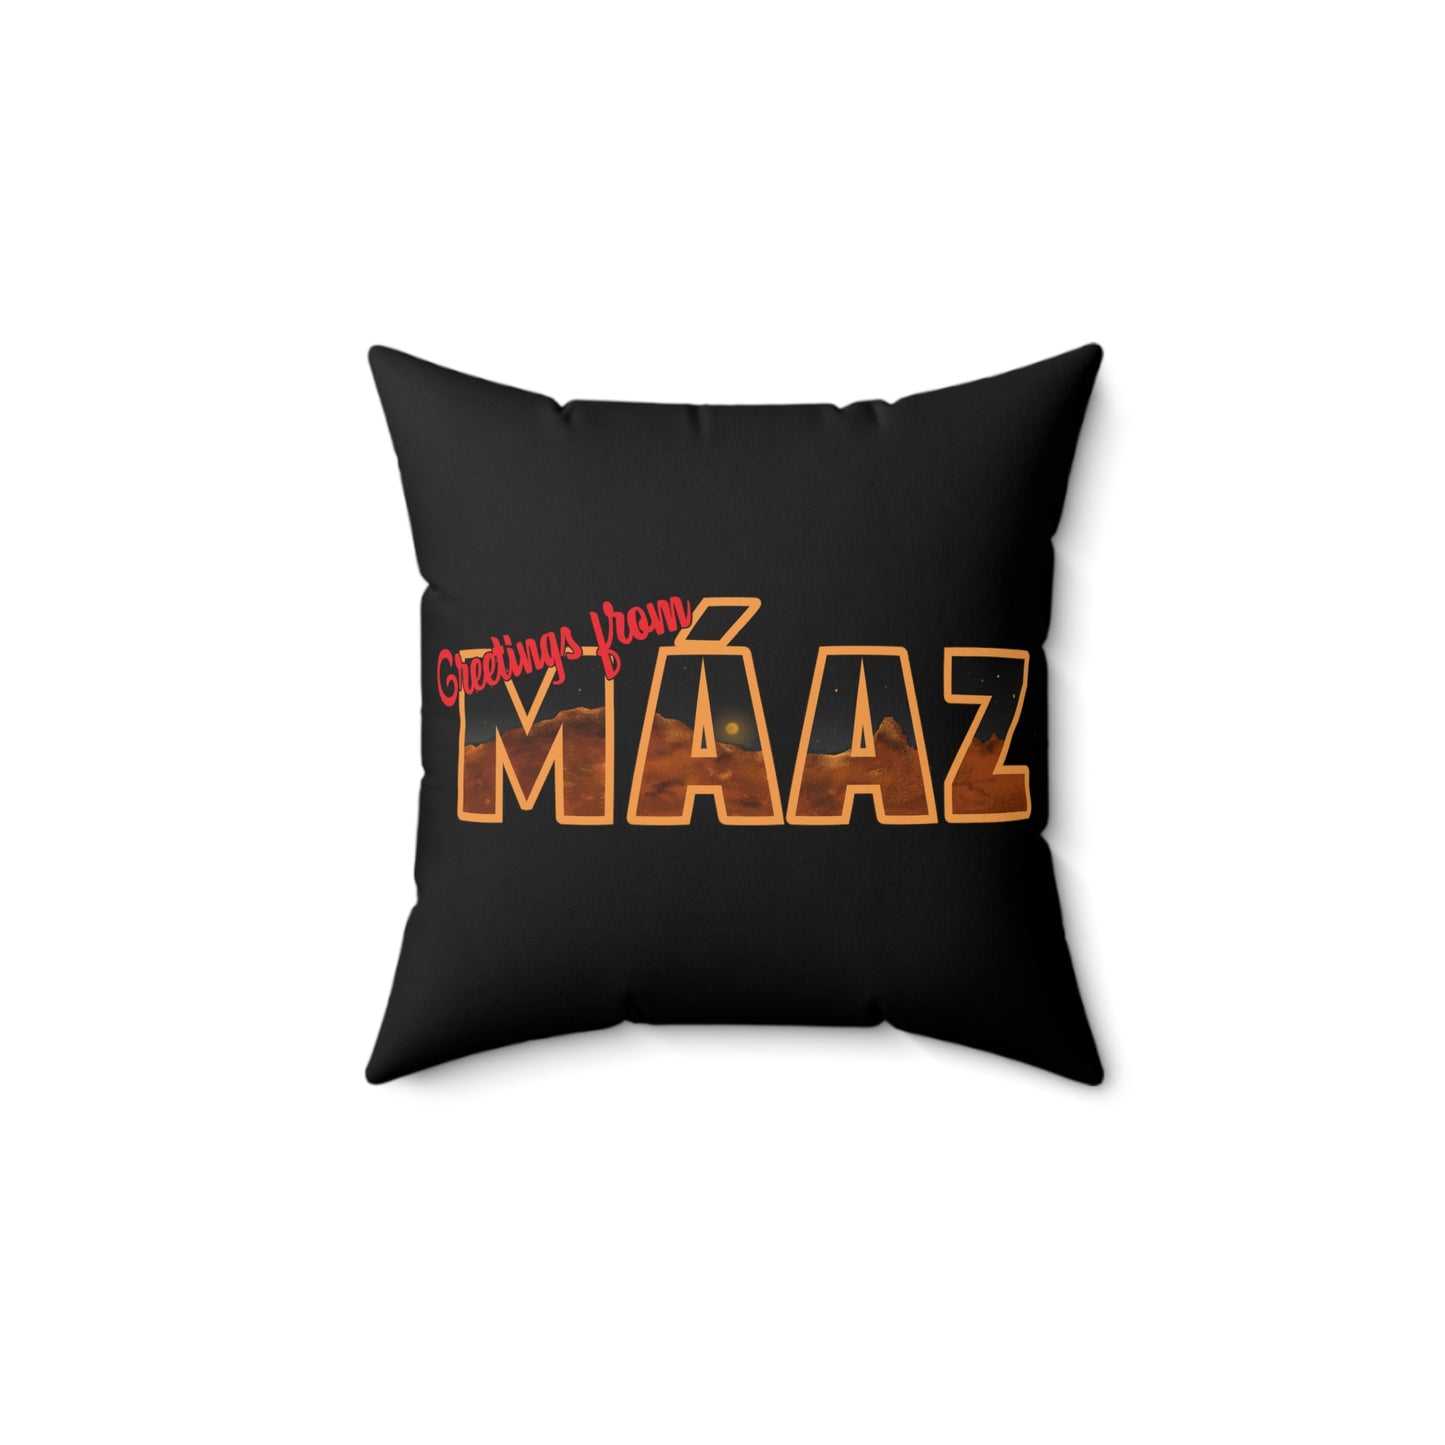 Greetings from Máaz Spun Polyester Square Pillow